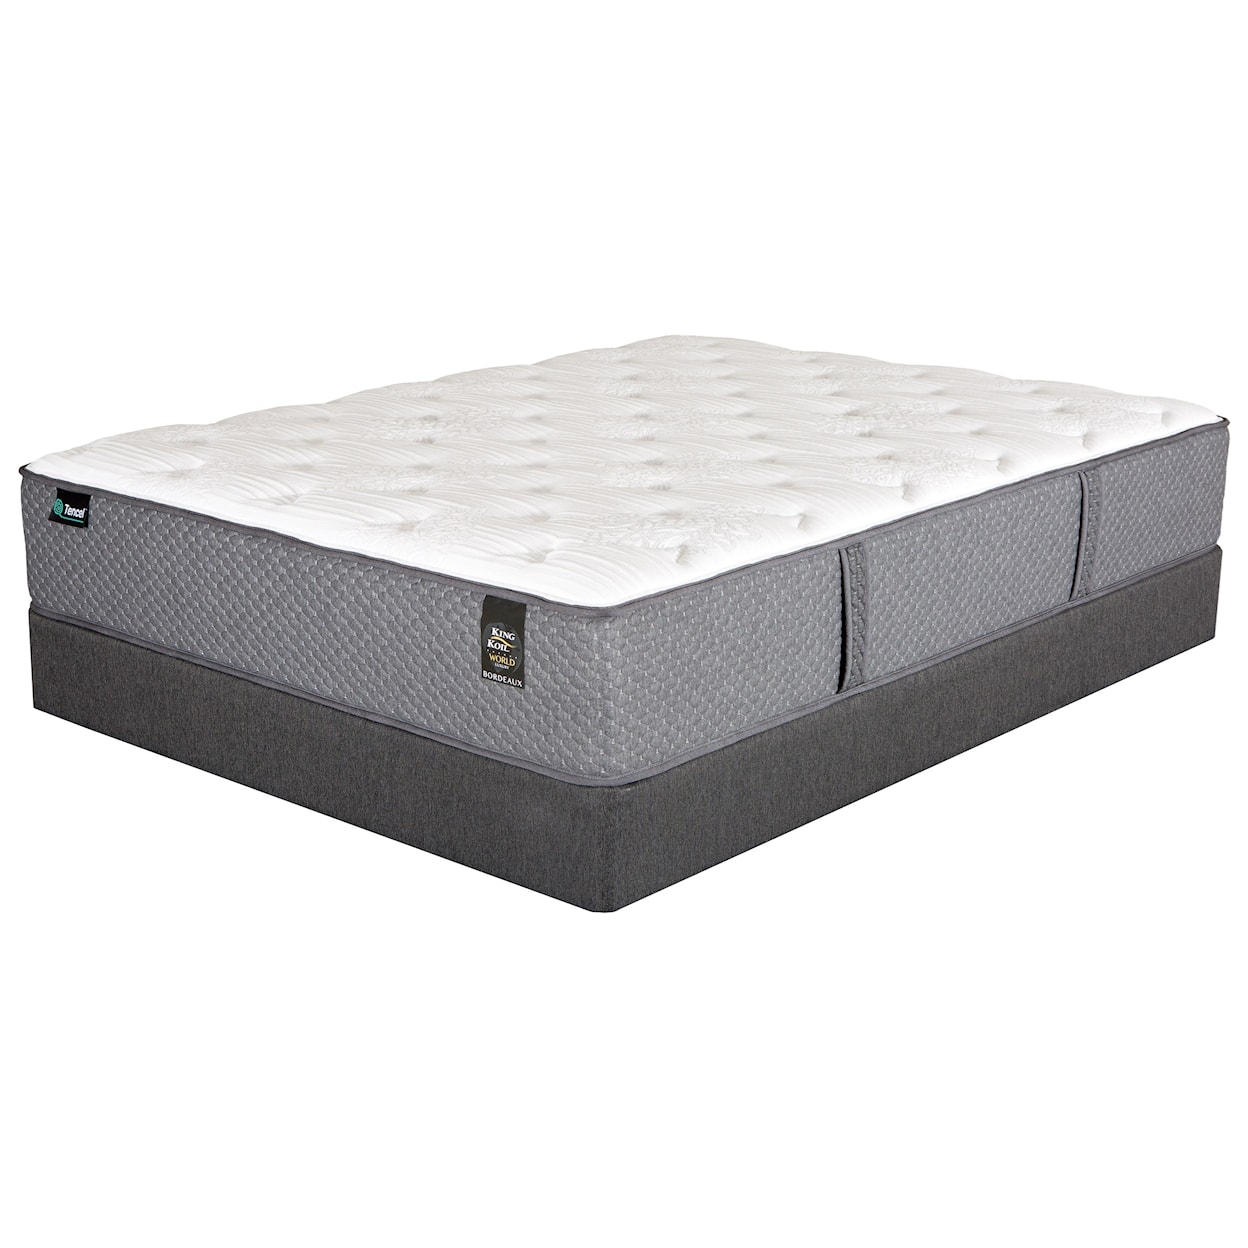 King Koil Beaumont P Twin Pocketed Coil Mattress Set